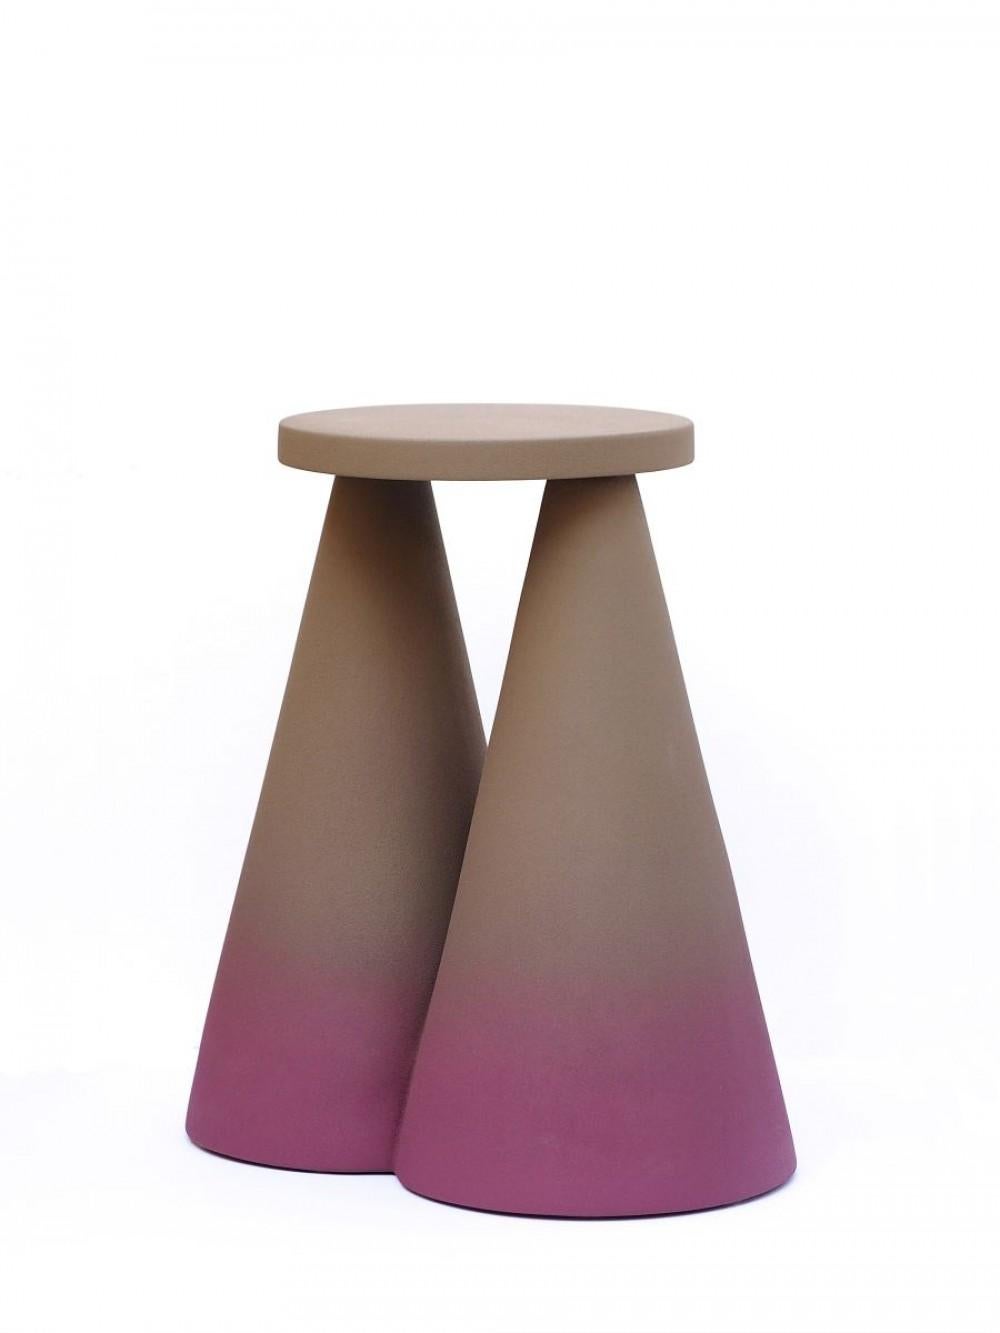 Ceramic Isola Side Table by Cara Davide